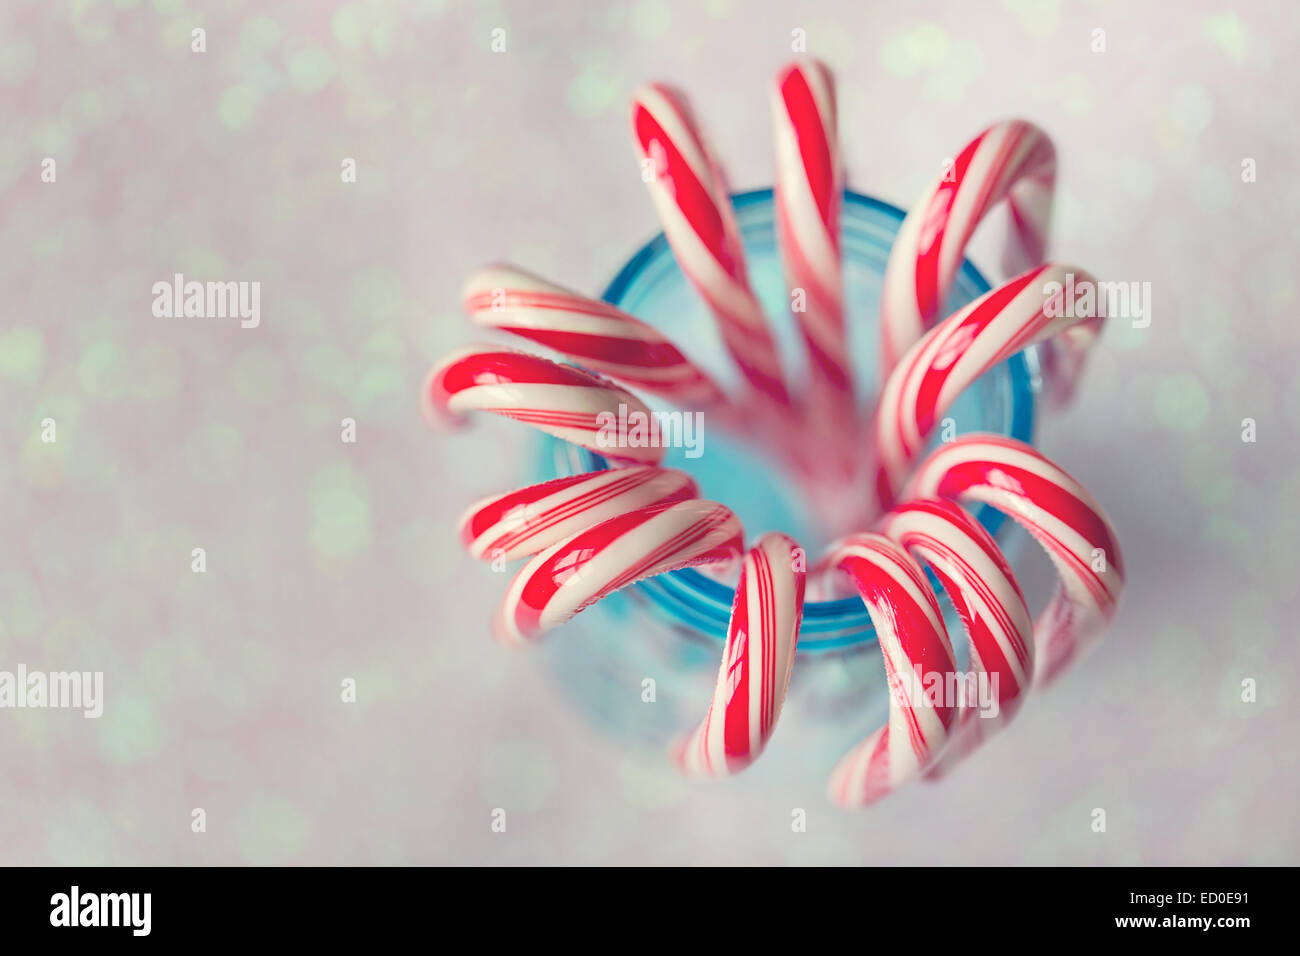 Red and white striped candy canes in blue mason jar against glittering background Stock Photo